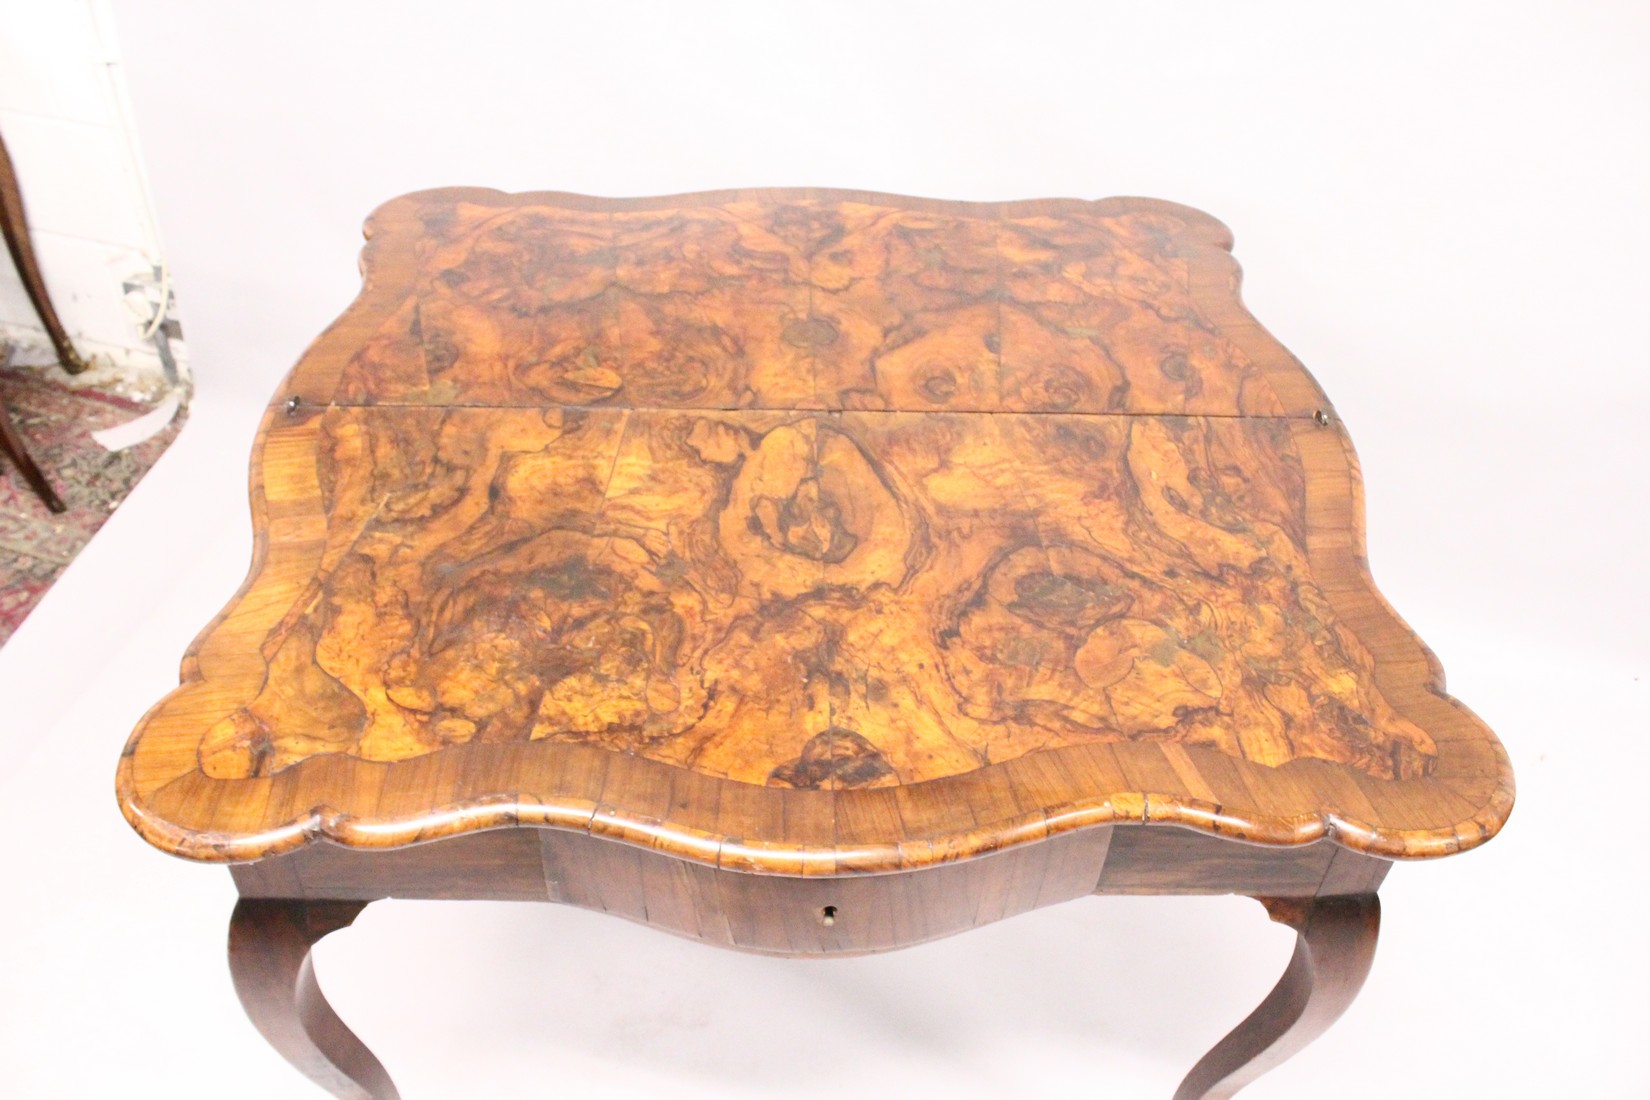 AN 18TH CENTURY ITALIAN FIGURED WALNUT FOLD-OVER CARD / TEA TABLE, of serpentine outline, with a - Image 5 of 5